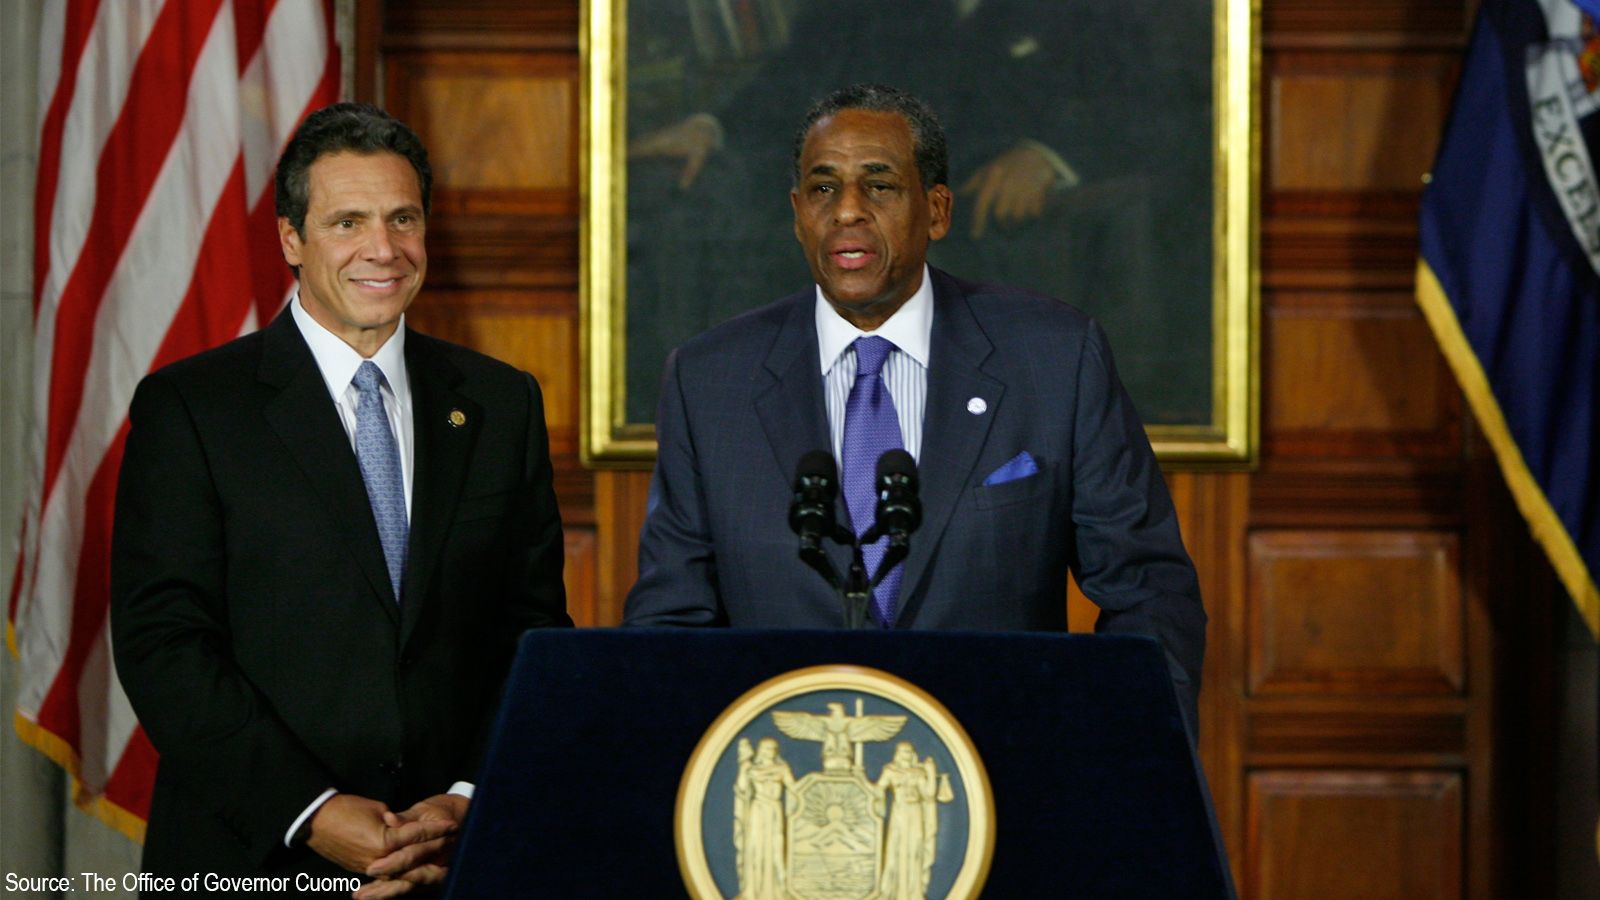 Governor Cuomo and the Honorable Carl McCall.